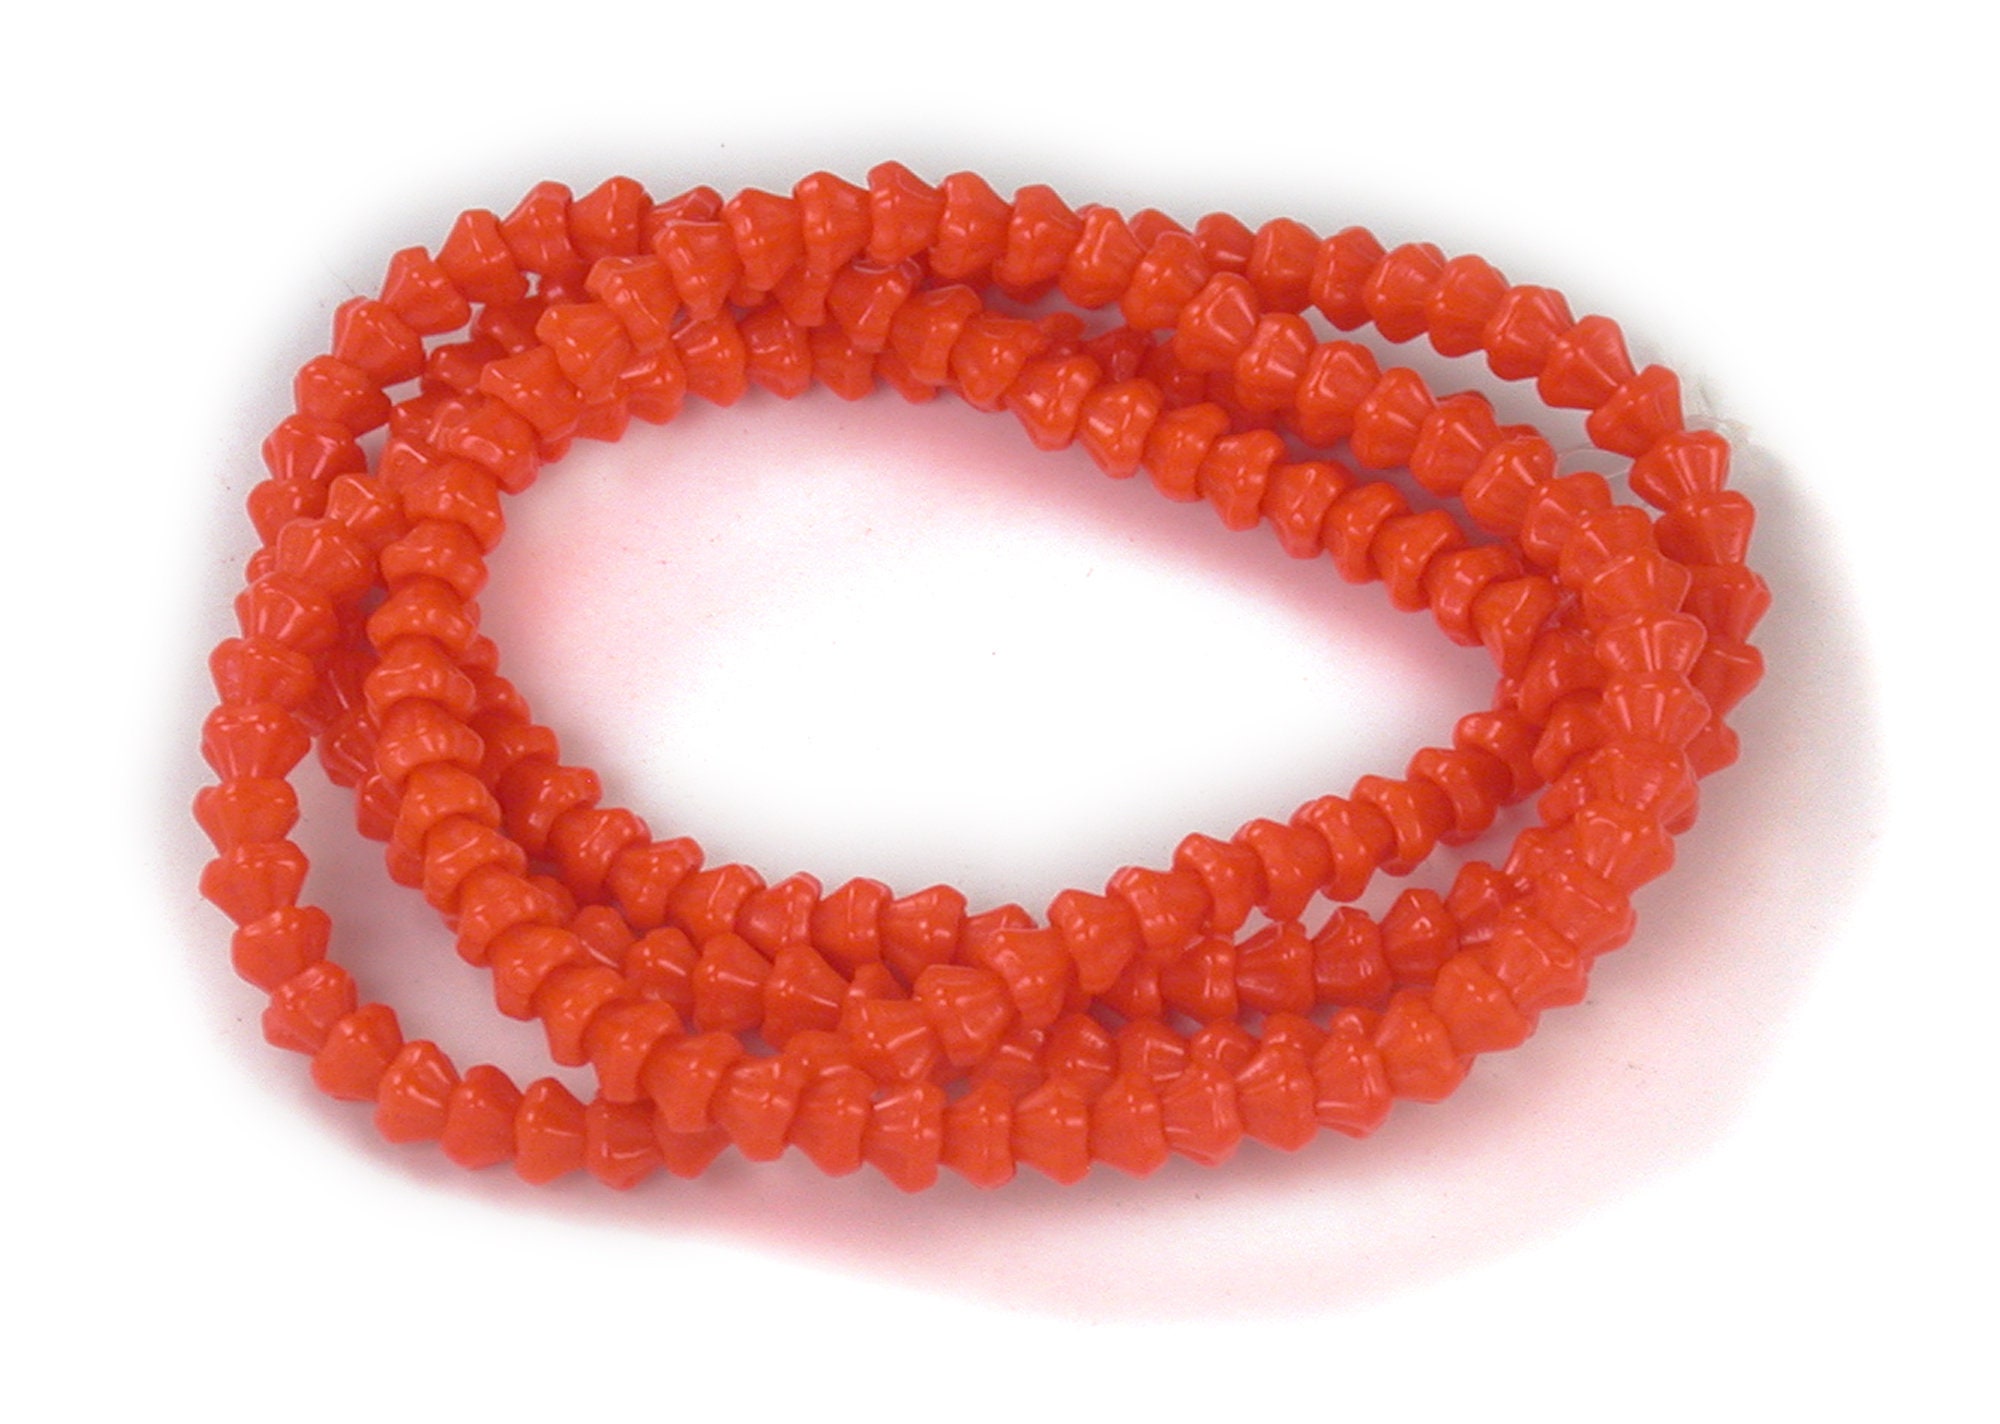 I 12mm Orange Glitter Pearls Beads Chunky Necklaces Set of 20